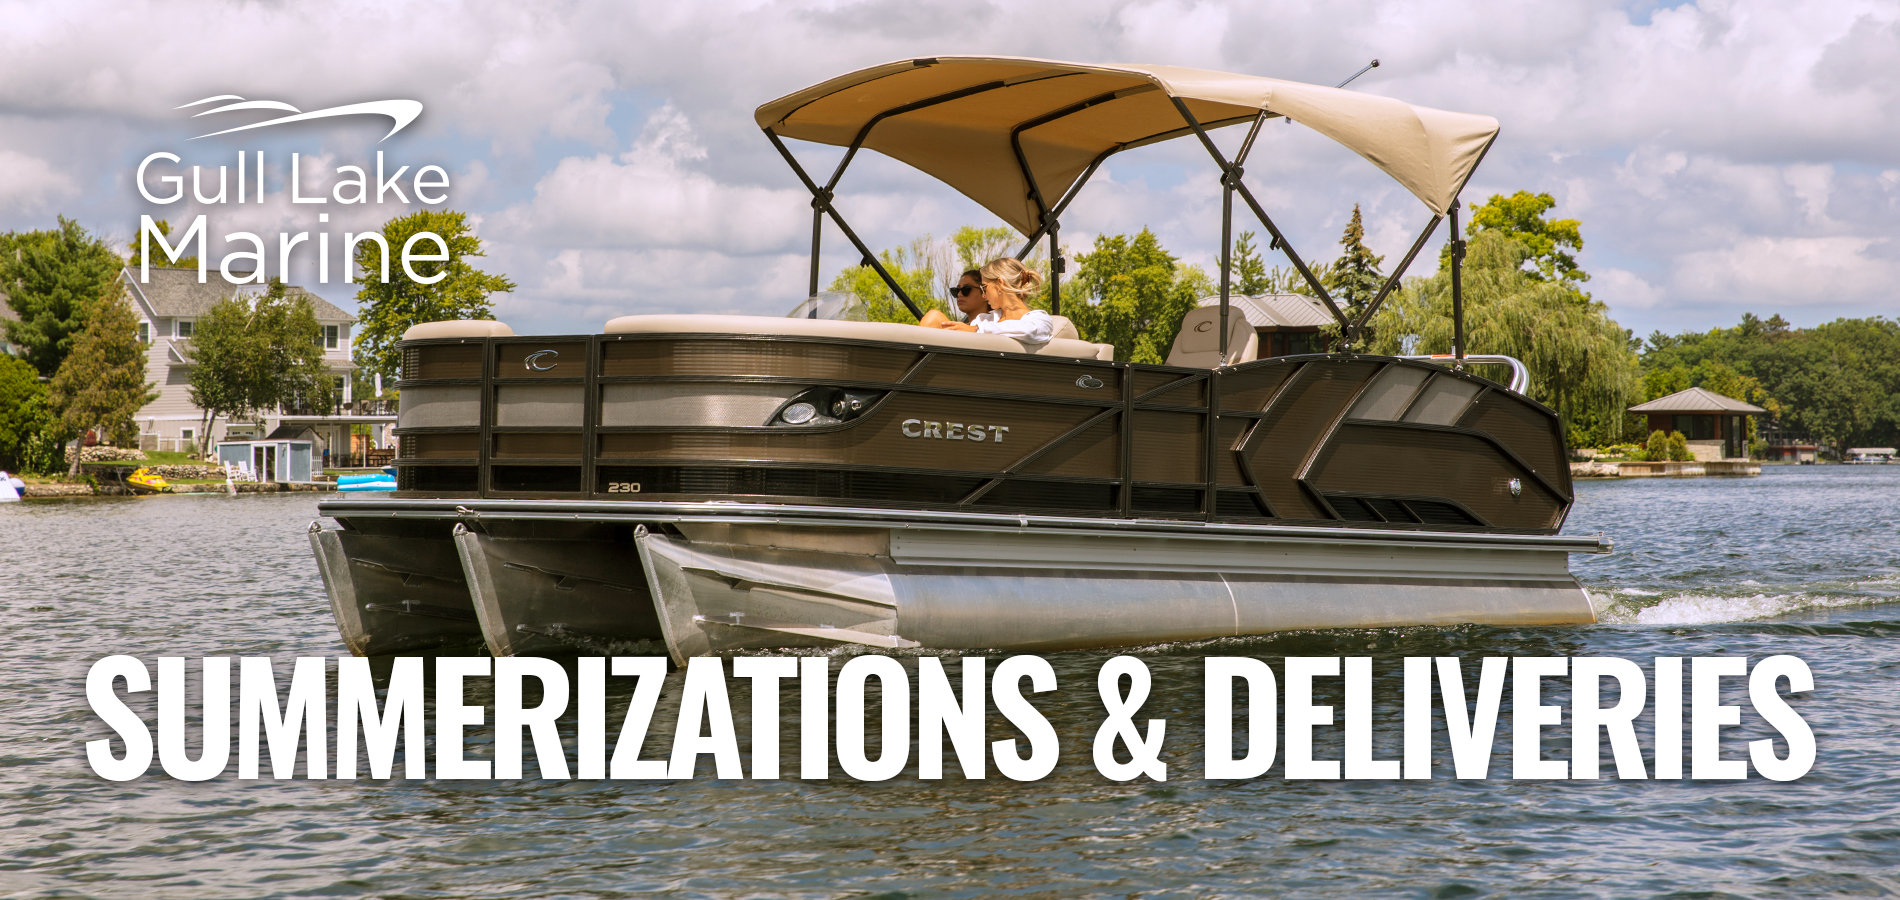 2022 Axis Boats for sale in Gull Lake Marine South Haven, South Haven, Michigan